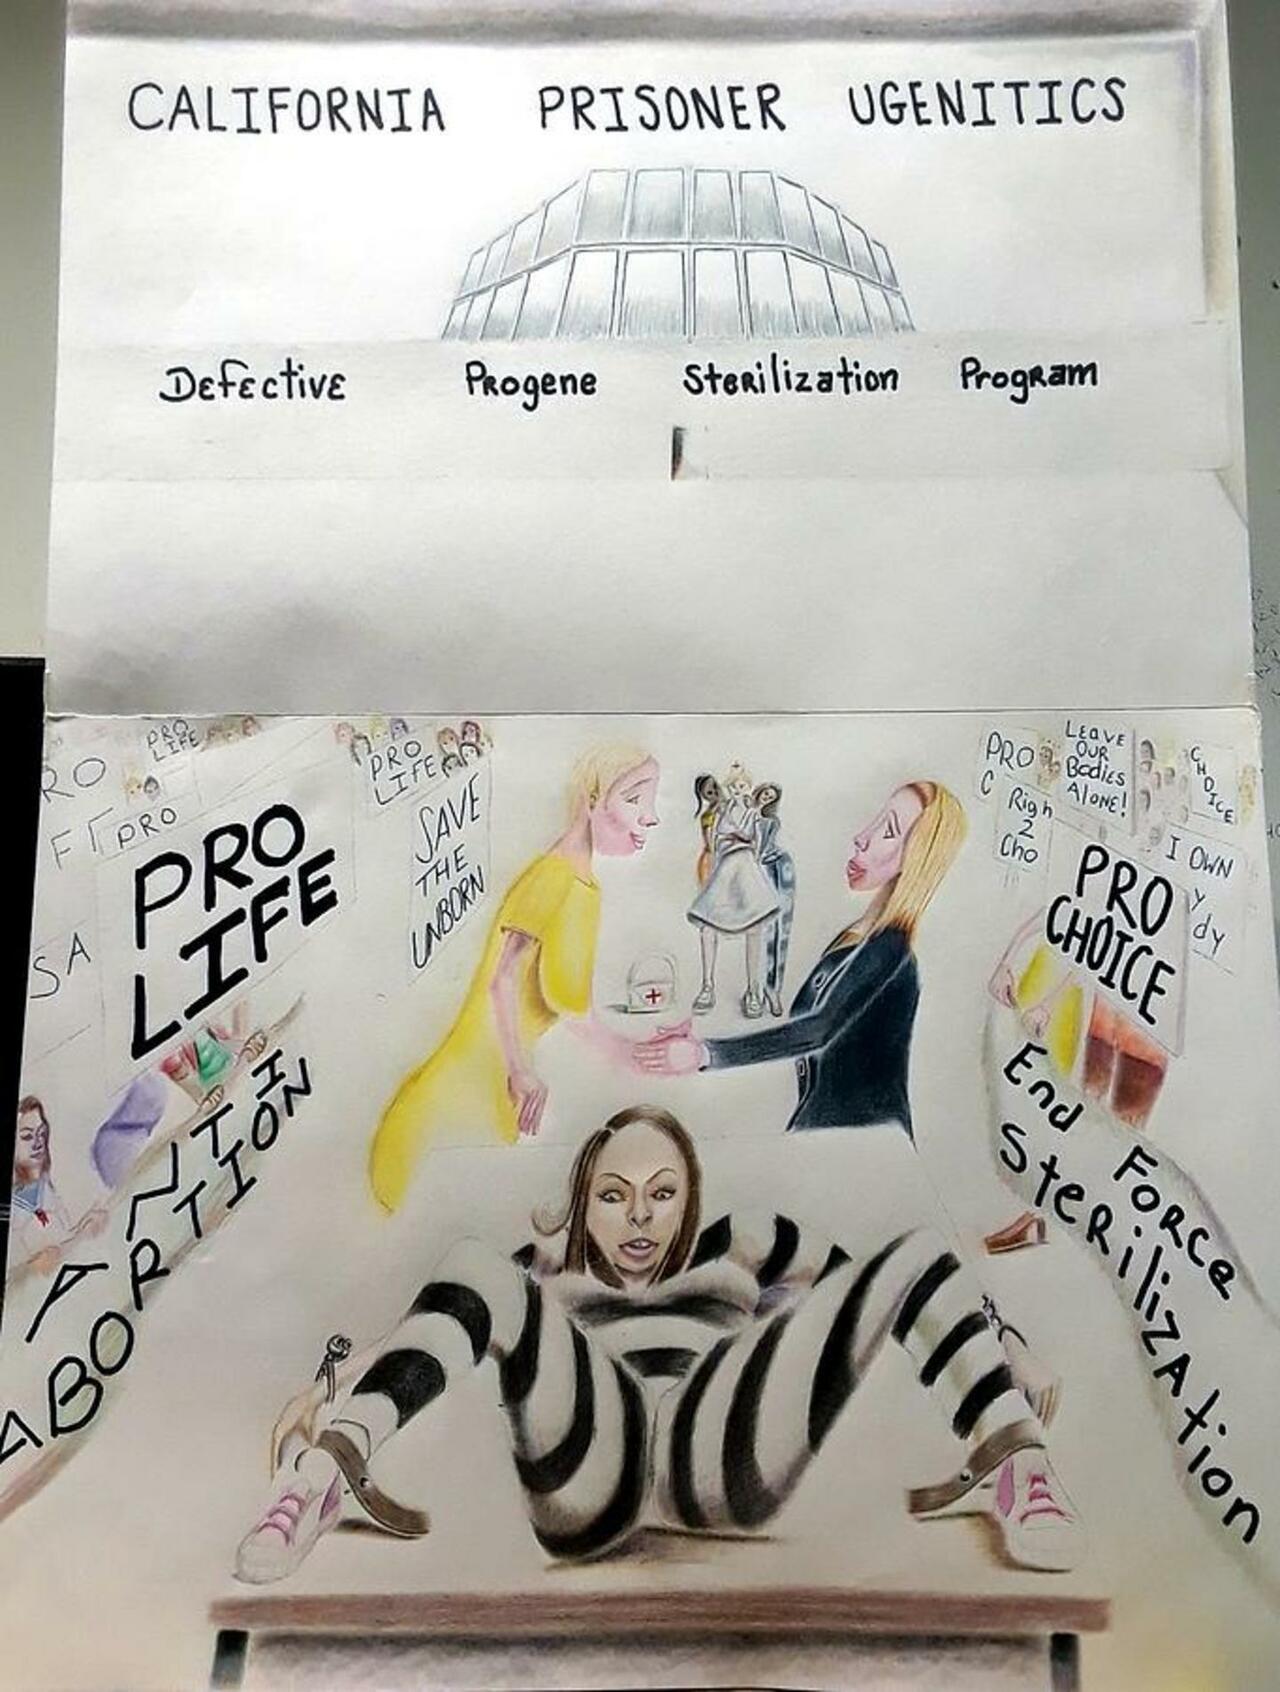 Prisoner-Artist, Donald "C-Note" Hooker, Tells "Mprisond Poetz", Why Forced Sterilization at California Women Prisons, Inspired His Work, 'Today We Are Sisters'.